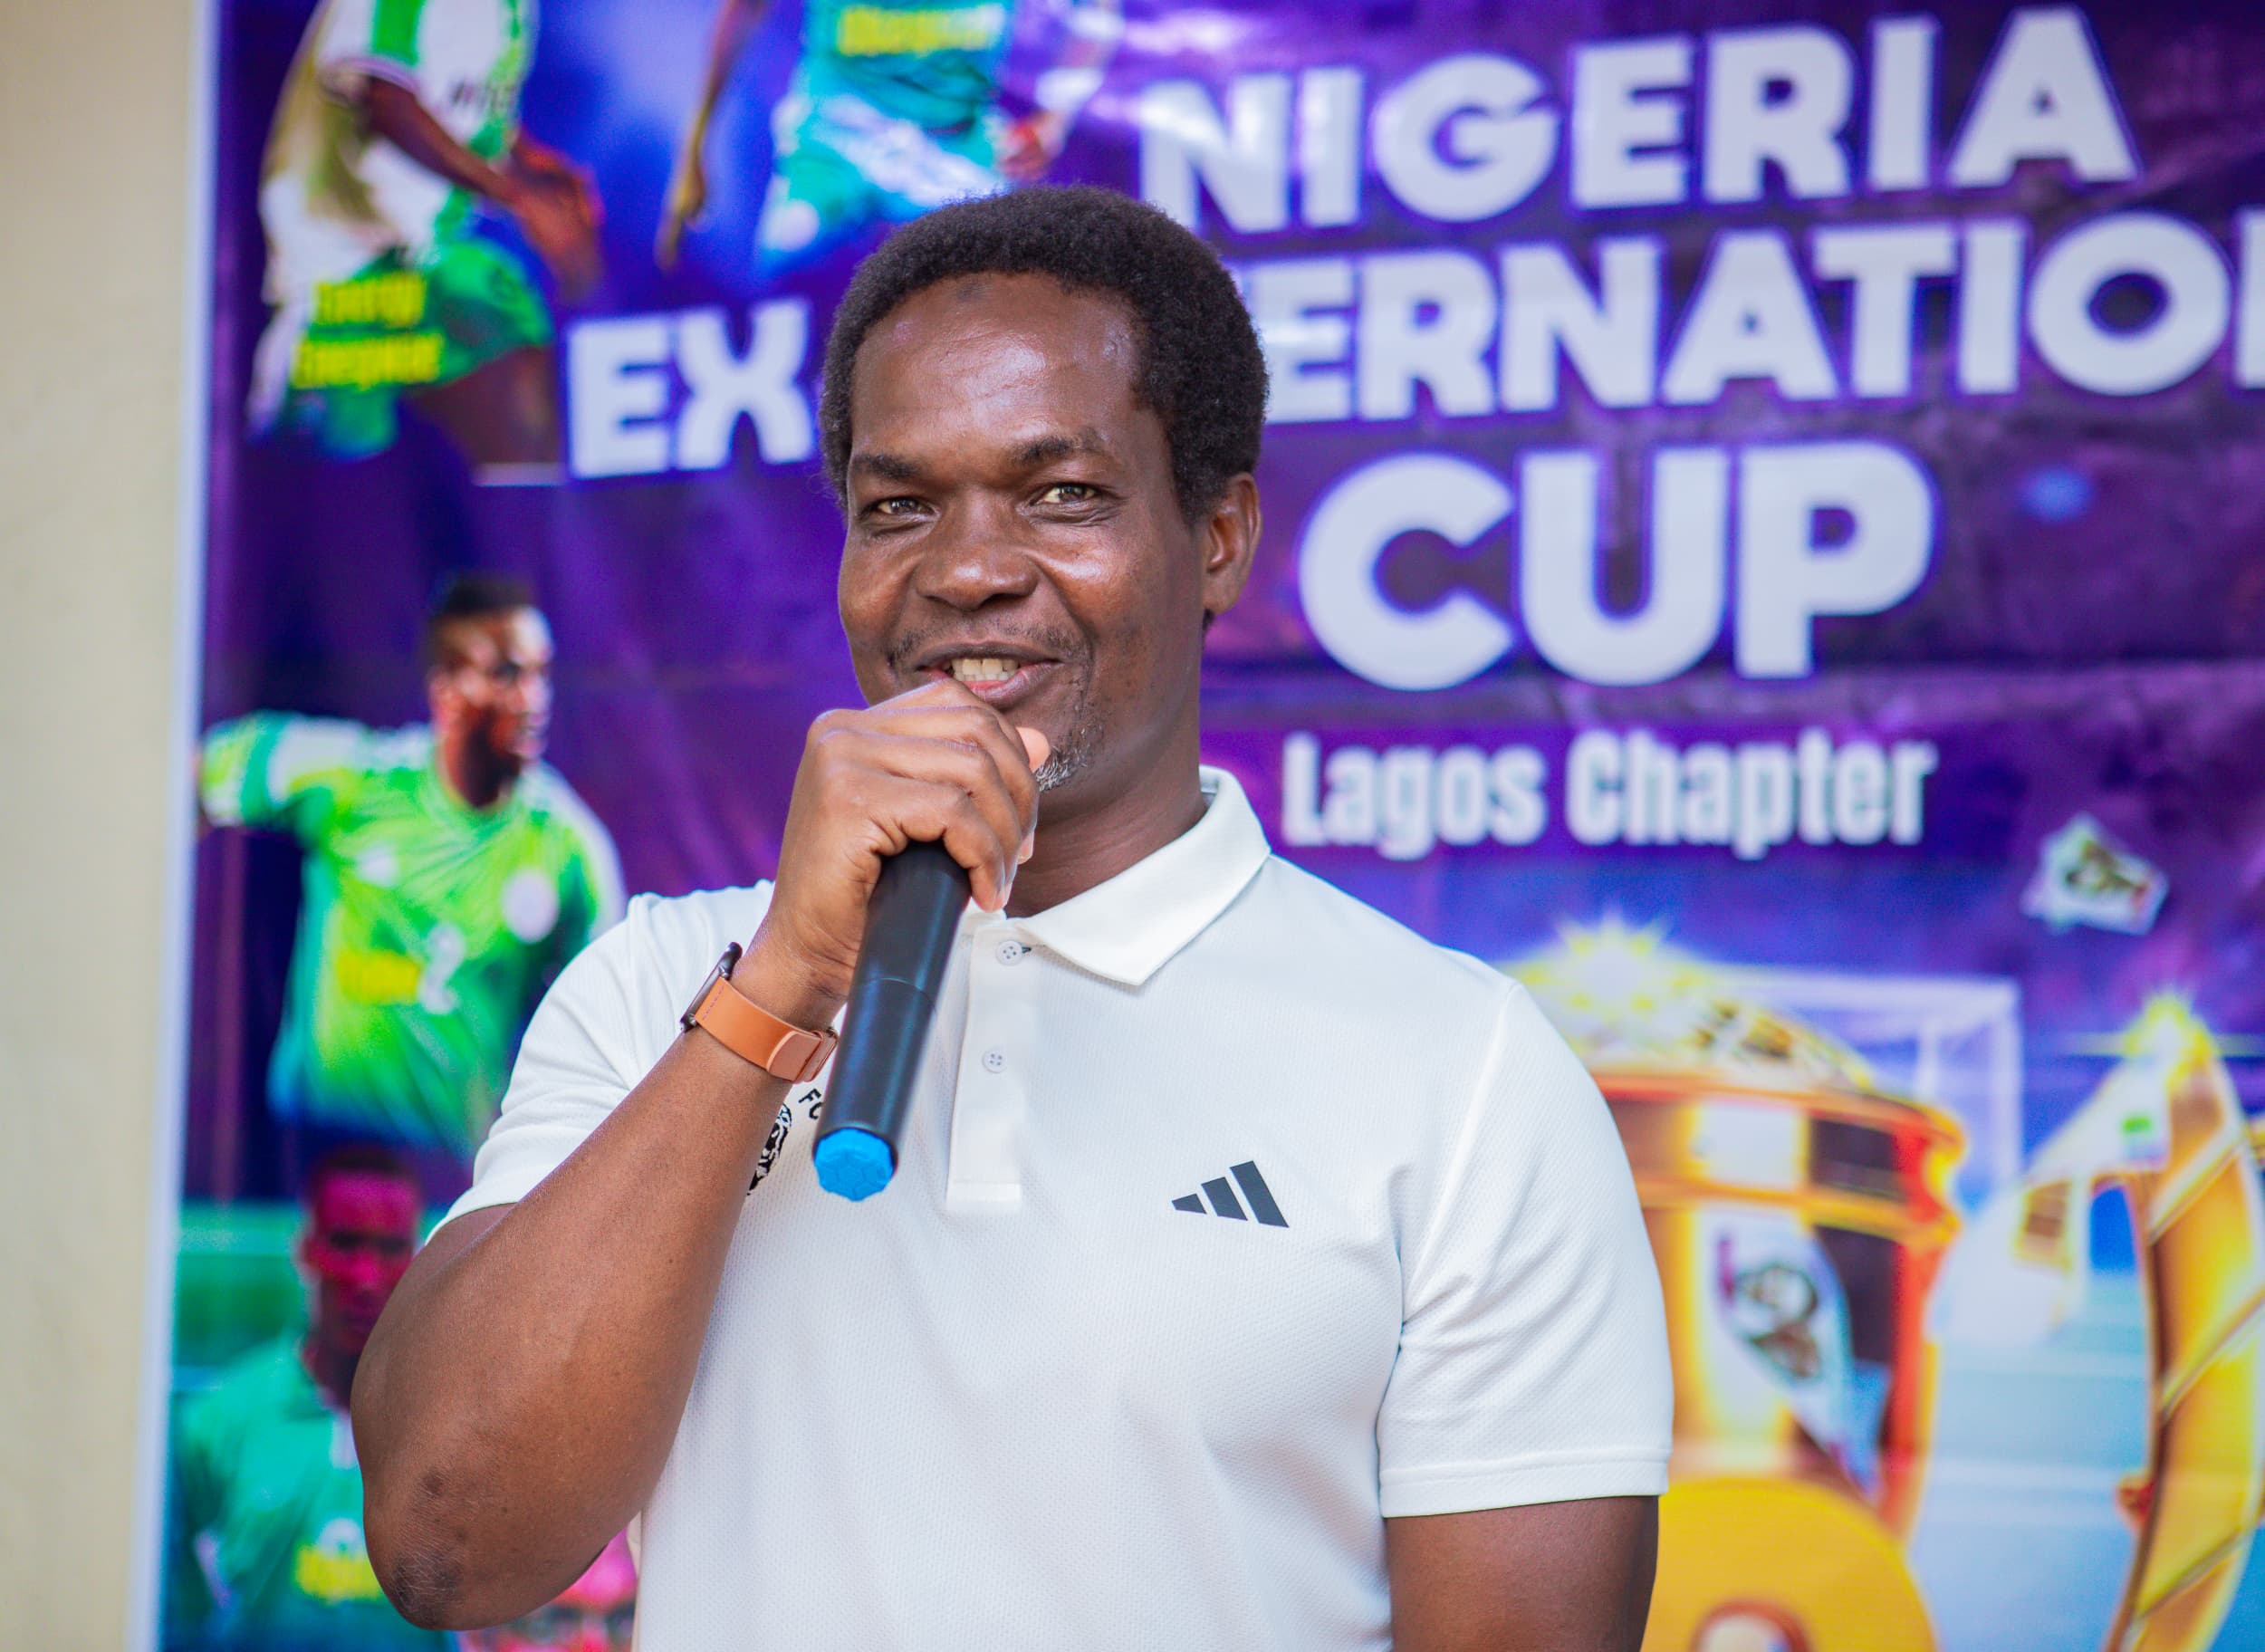 LSFA Chairman Affirms Commitment to Sustainable Football Development Amid Challenges